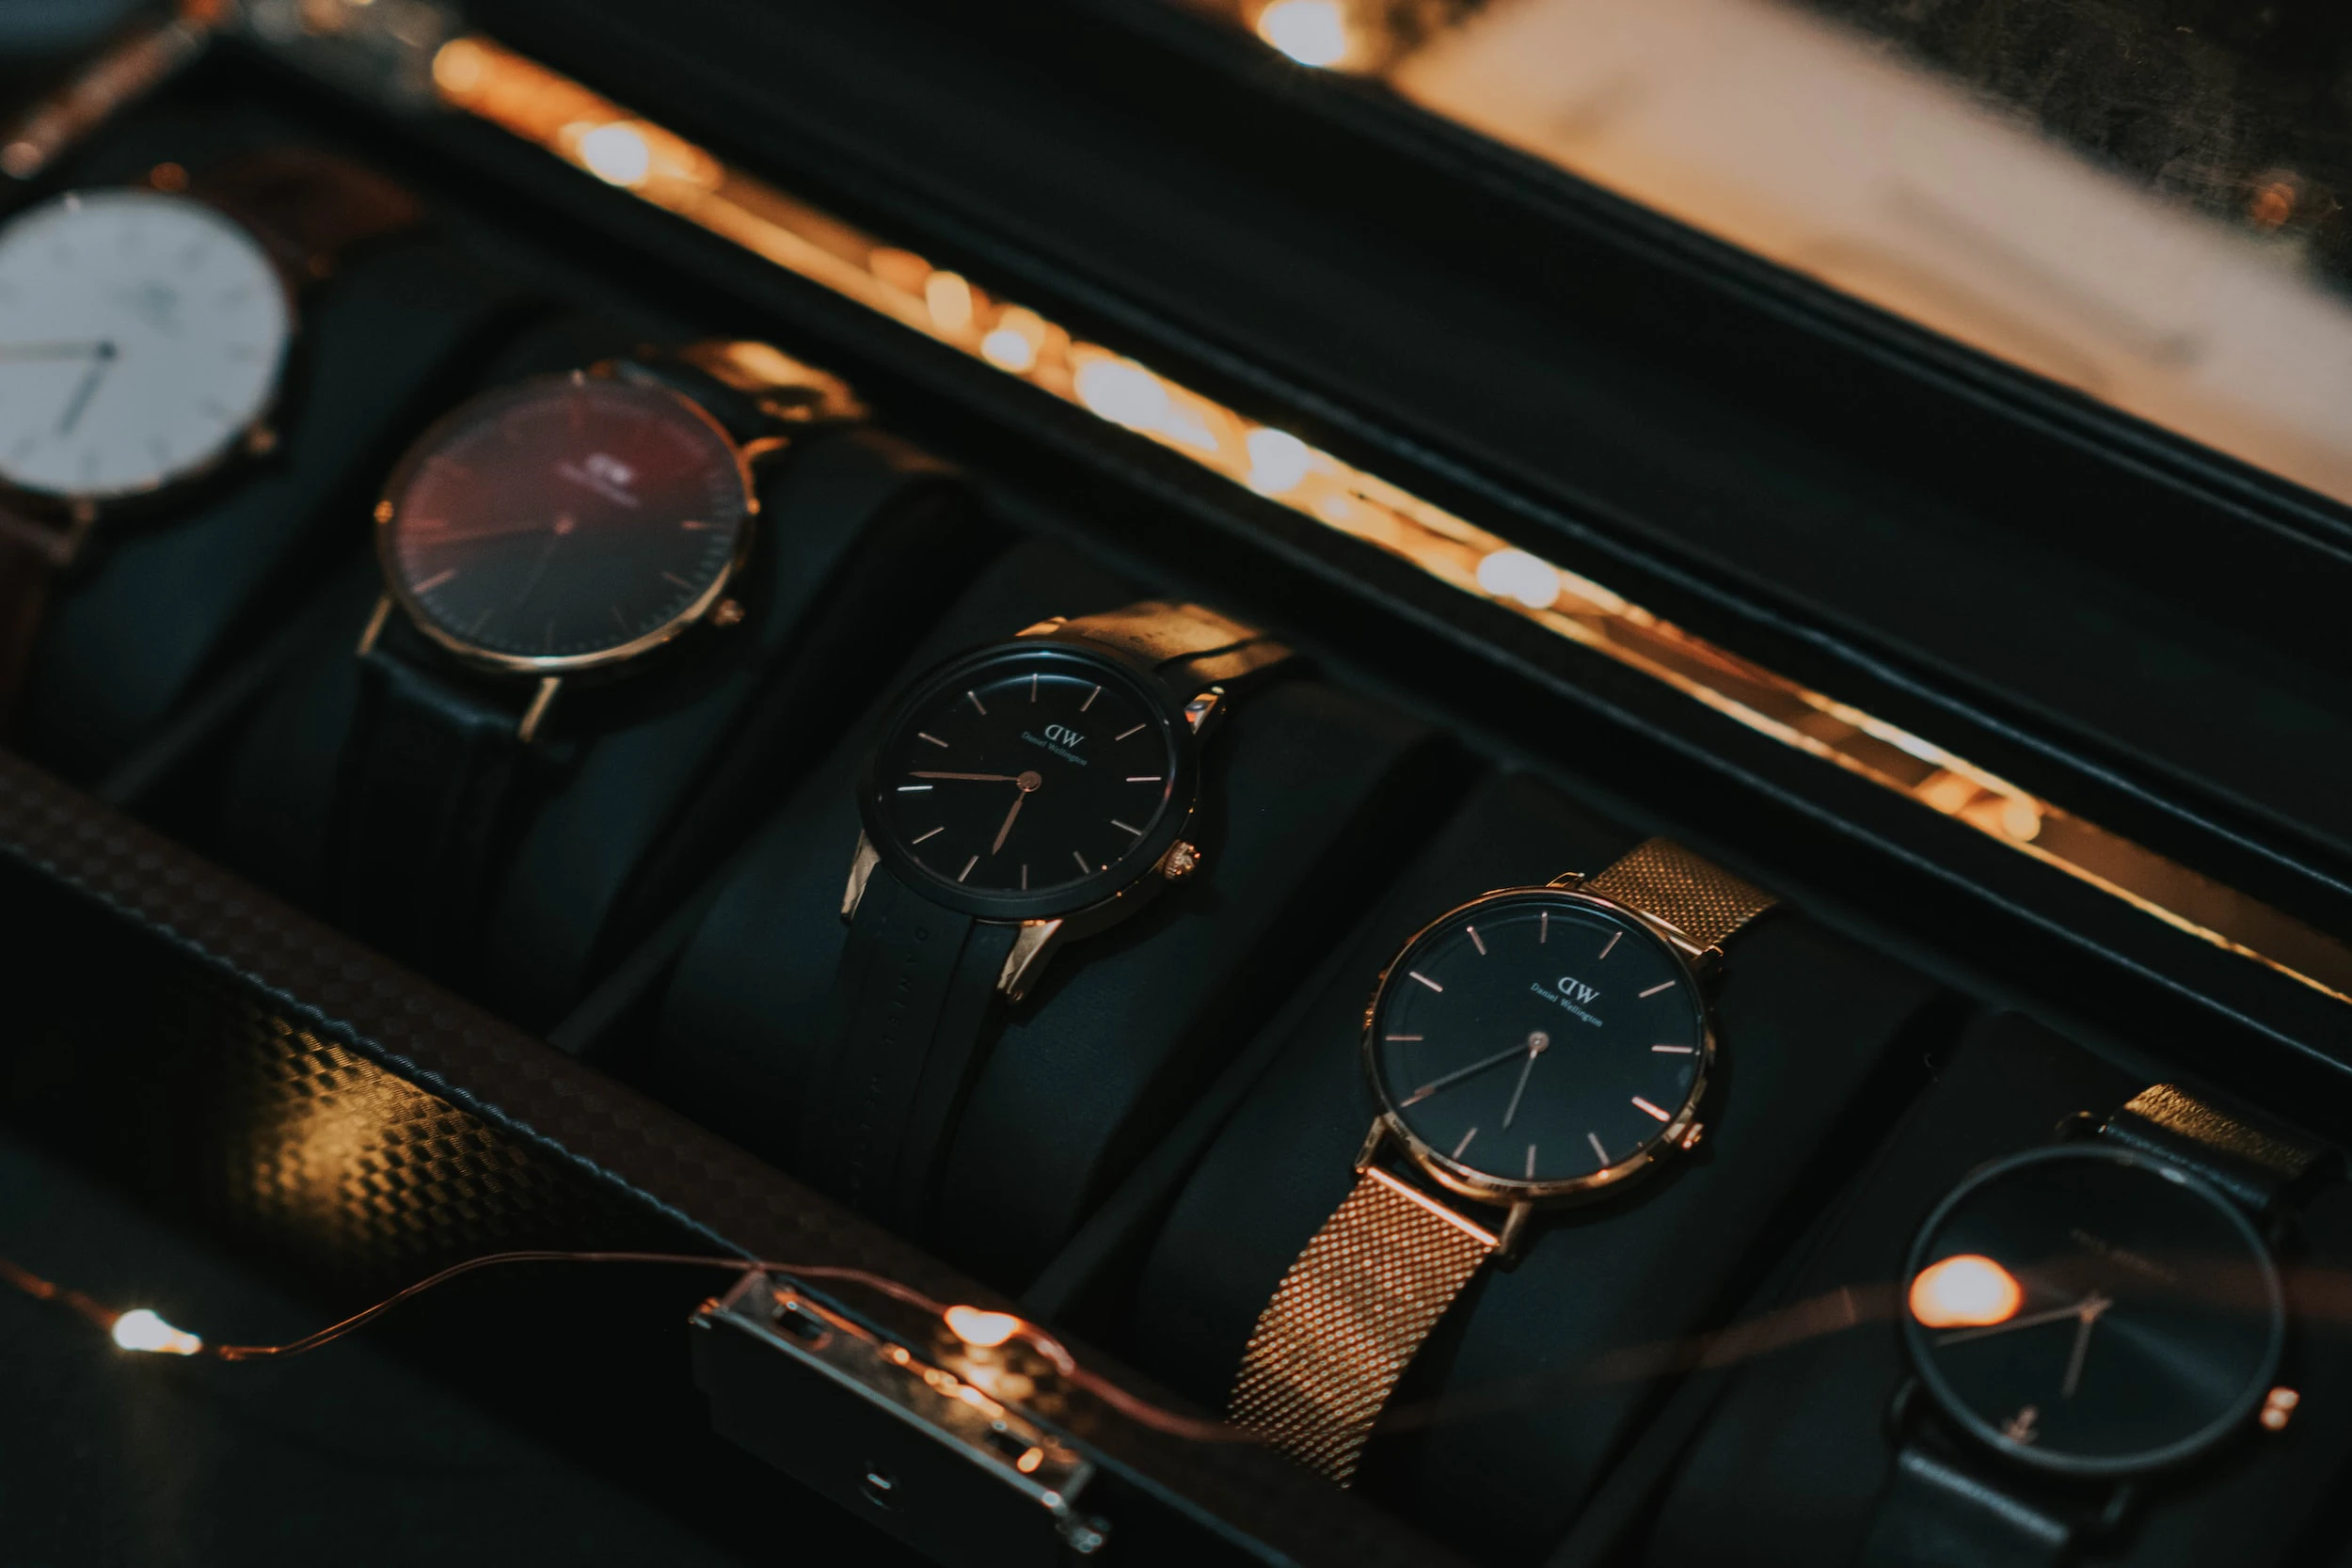 Collection of 4 watches in a watch case